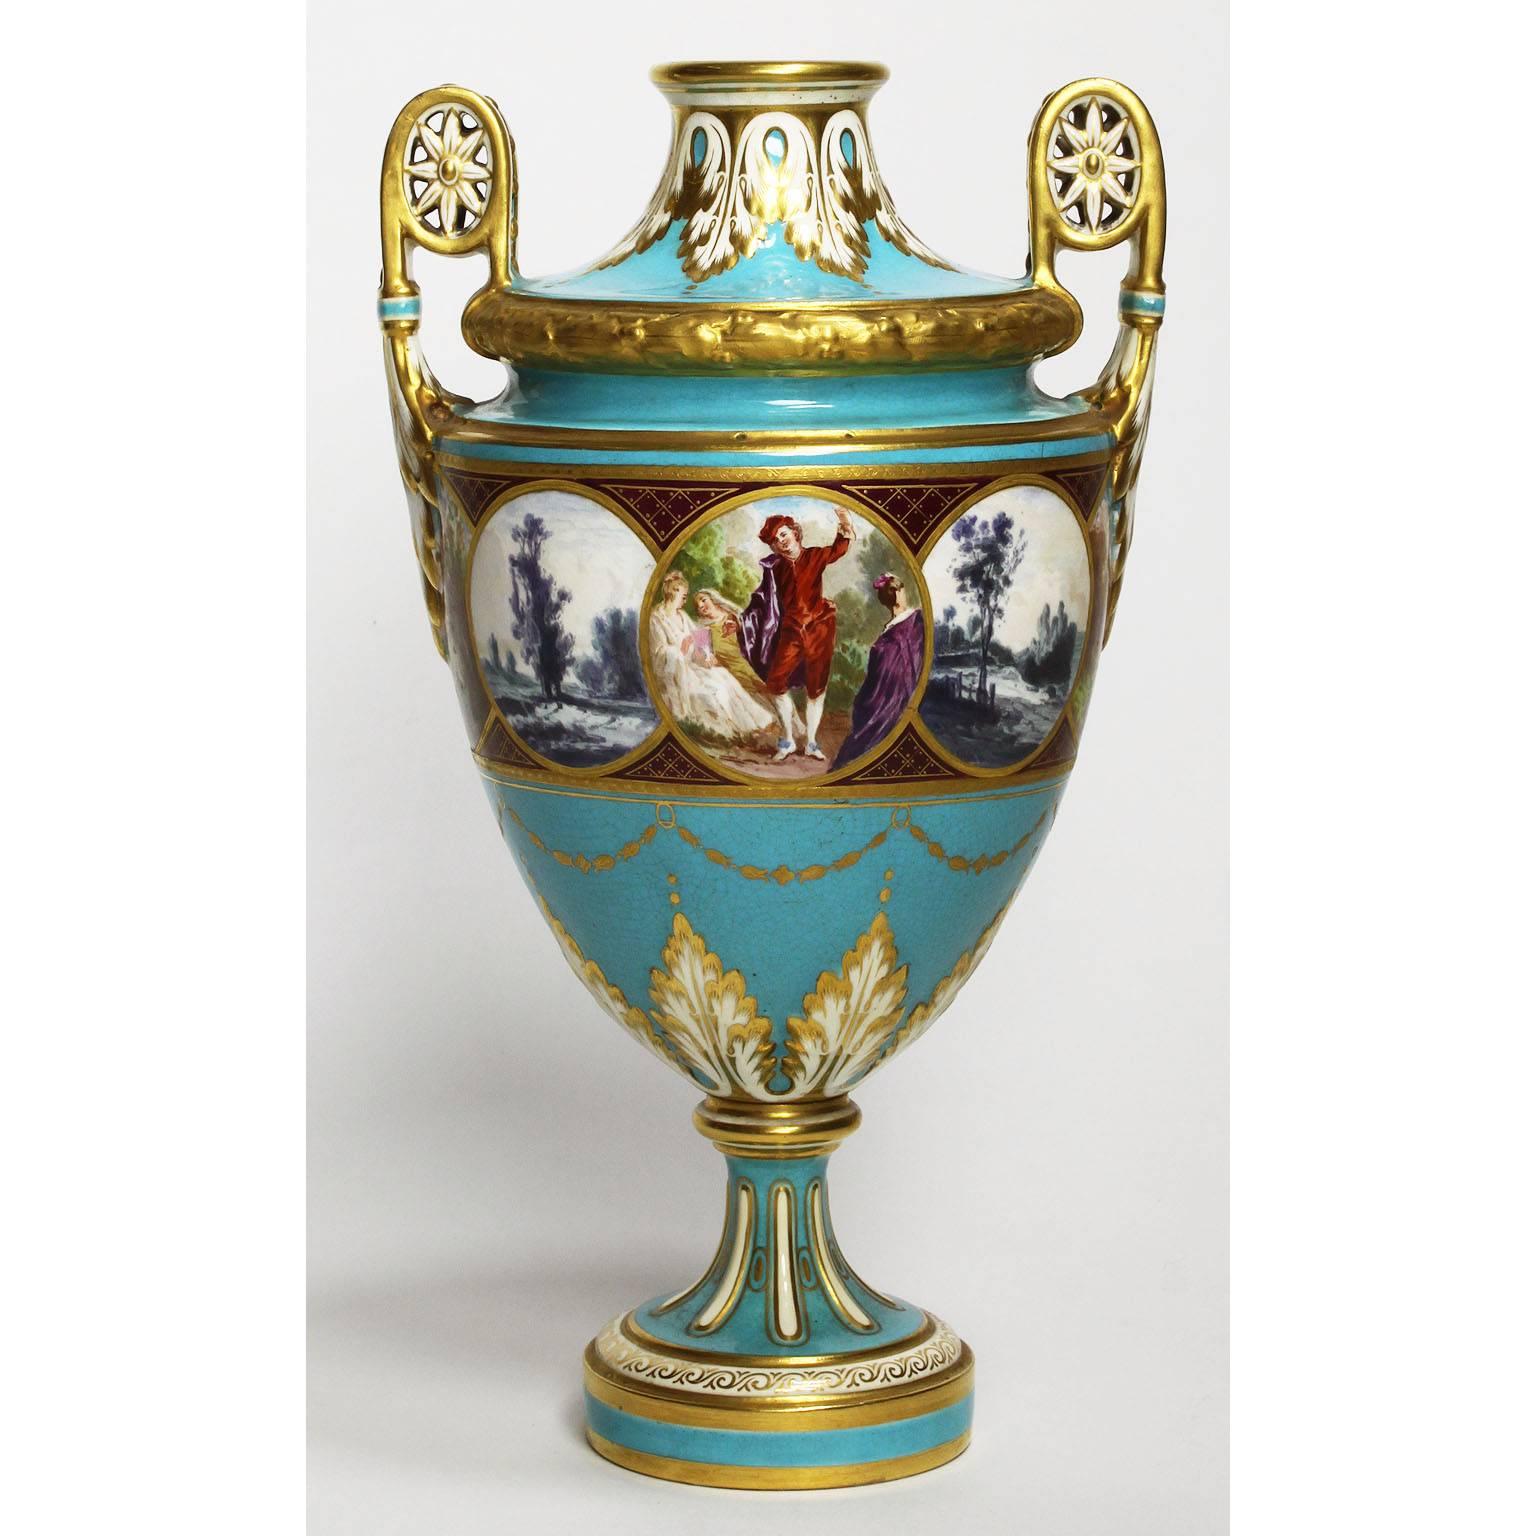 A fine pair of English 19th century turquoise ground and parcel-gilt painted porcelain vases, urns by Minton. The tapered shaped urns raised on a slender stem with turquoise grounds painted with romantic garden and courting scenes, with gilded